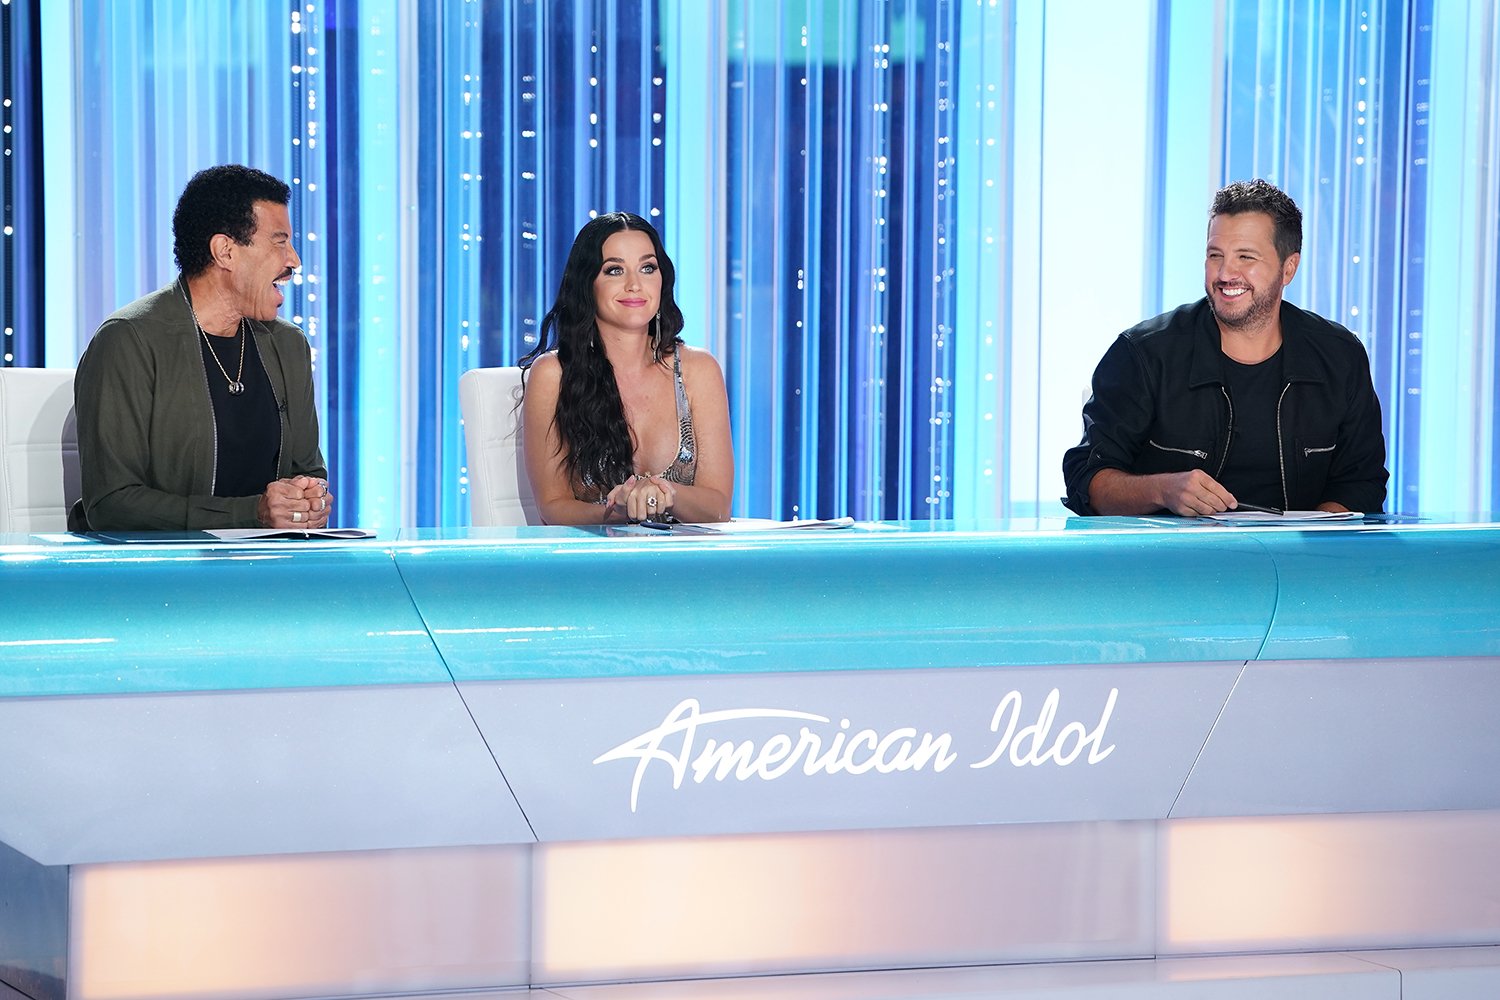 How Scripted Is ‘American Idol’? Plus 3 Other Behind-the-Scenes Secrets